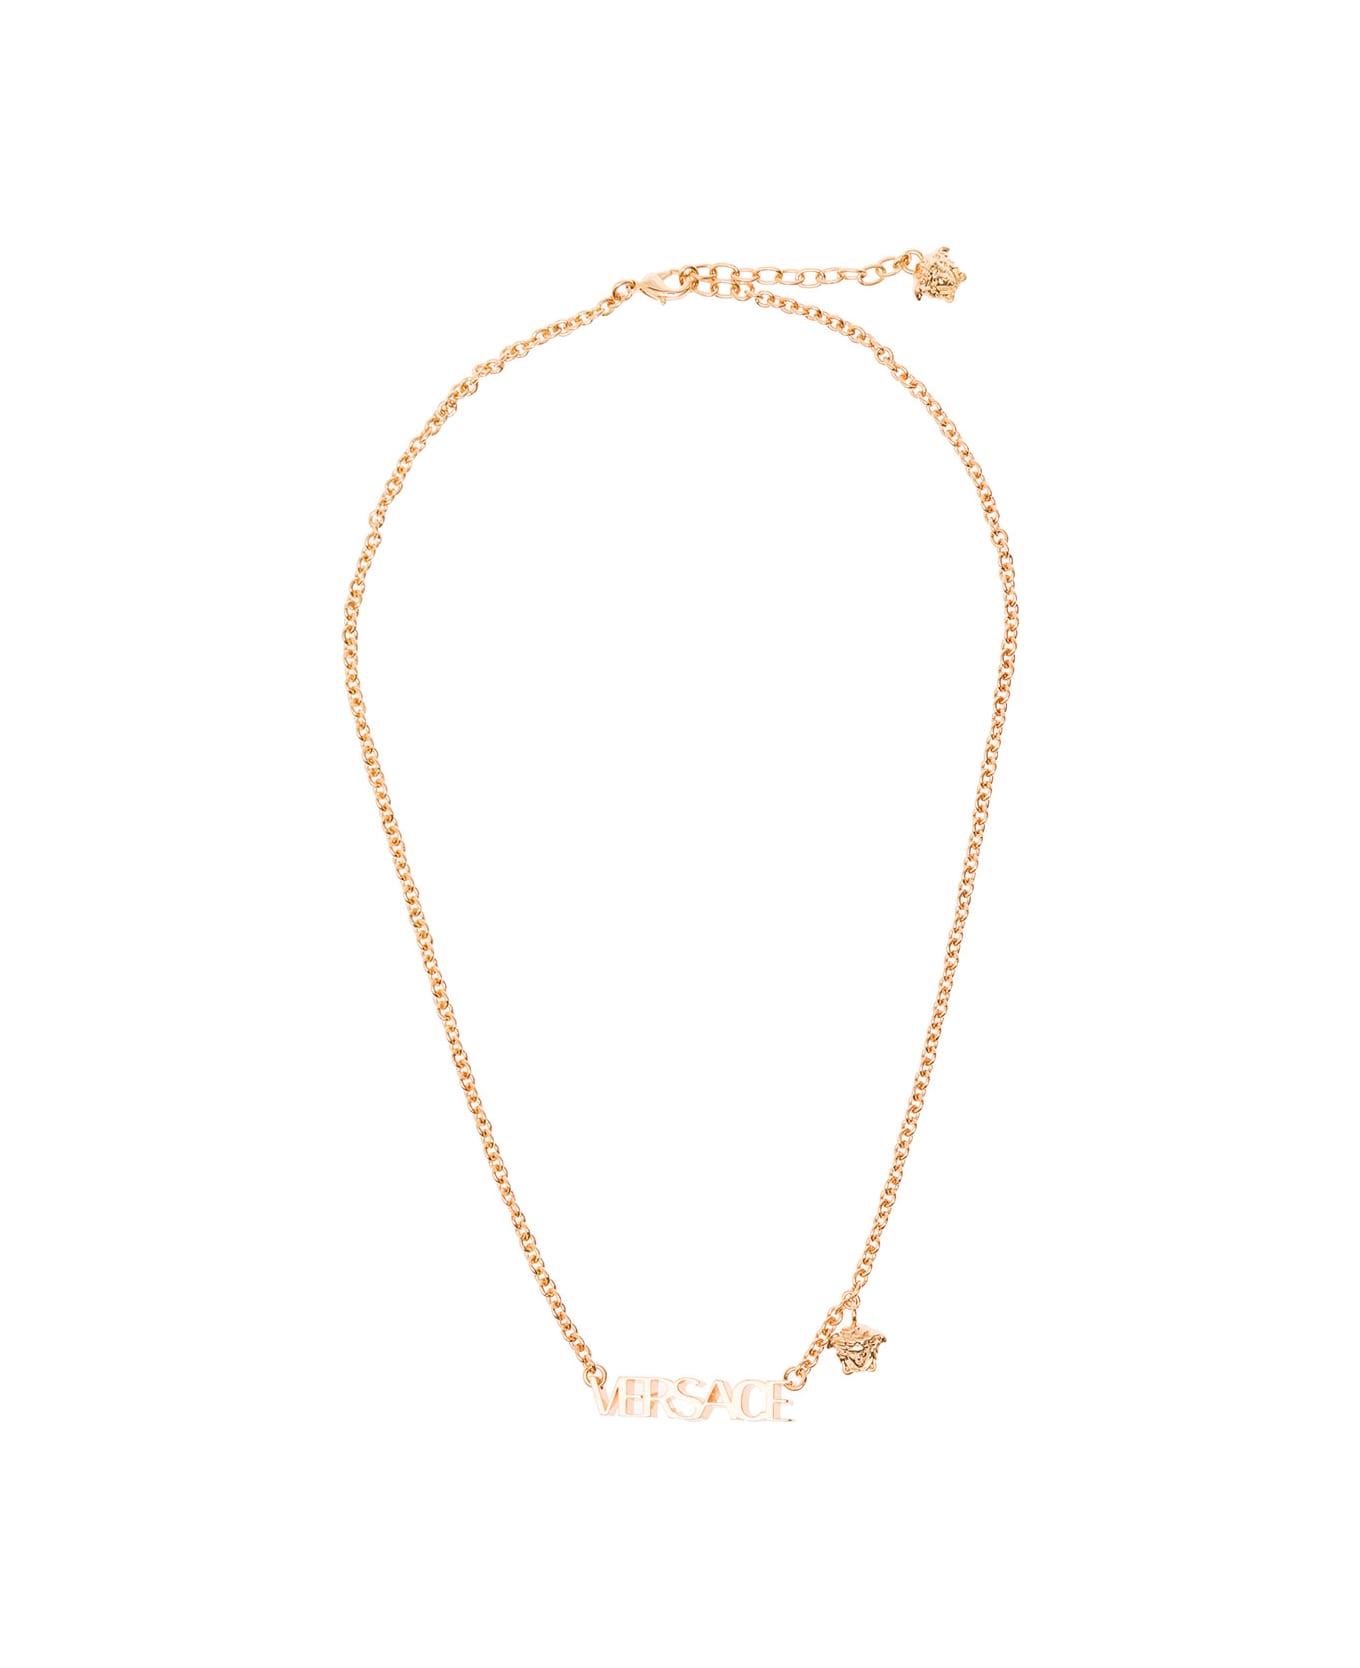 Versace Gold Metal Chain Necklace With Logo Dolce & Gabbana Woman - ORO